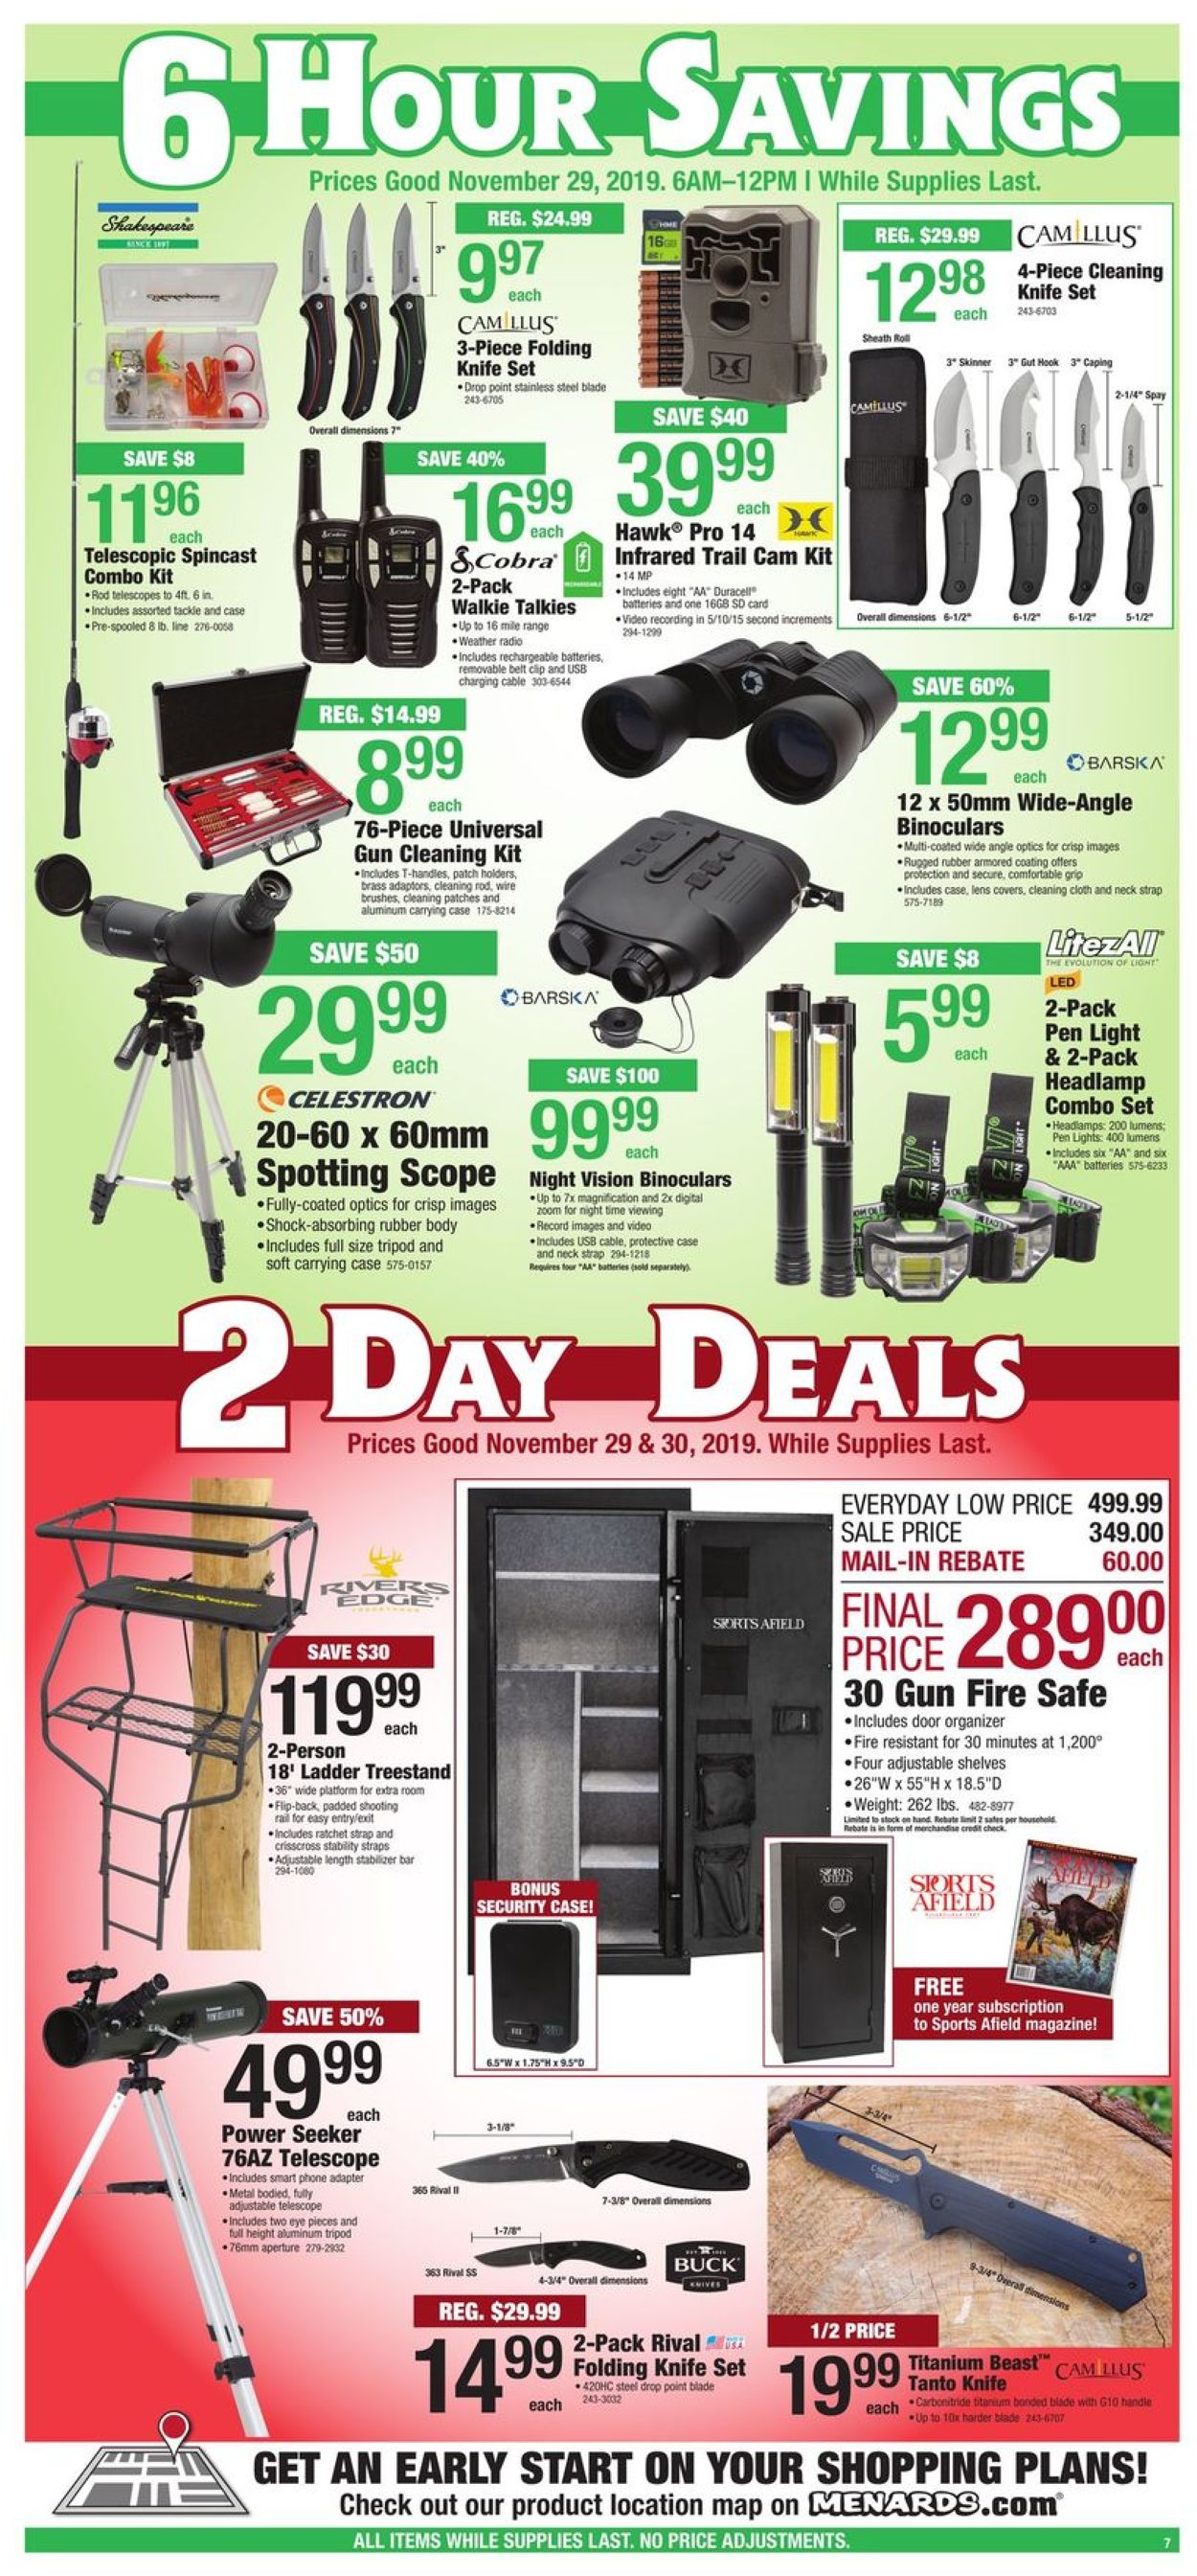 Menards - Black Friday Sale 2019 Current weekly ad 11/29 - 11/30/2019 [8] - 0